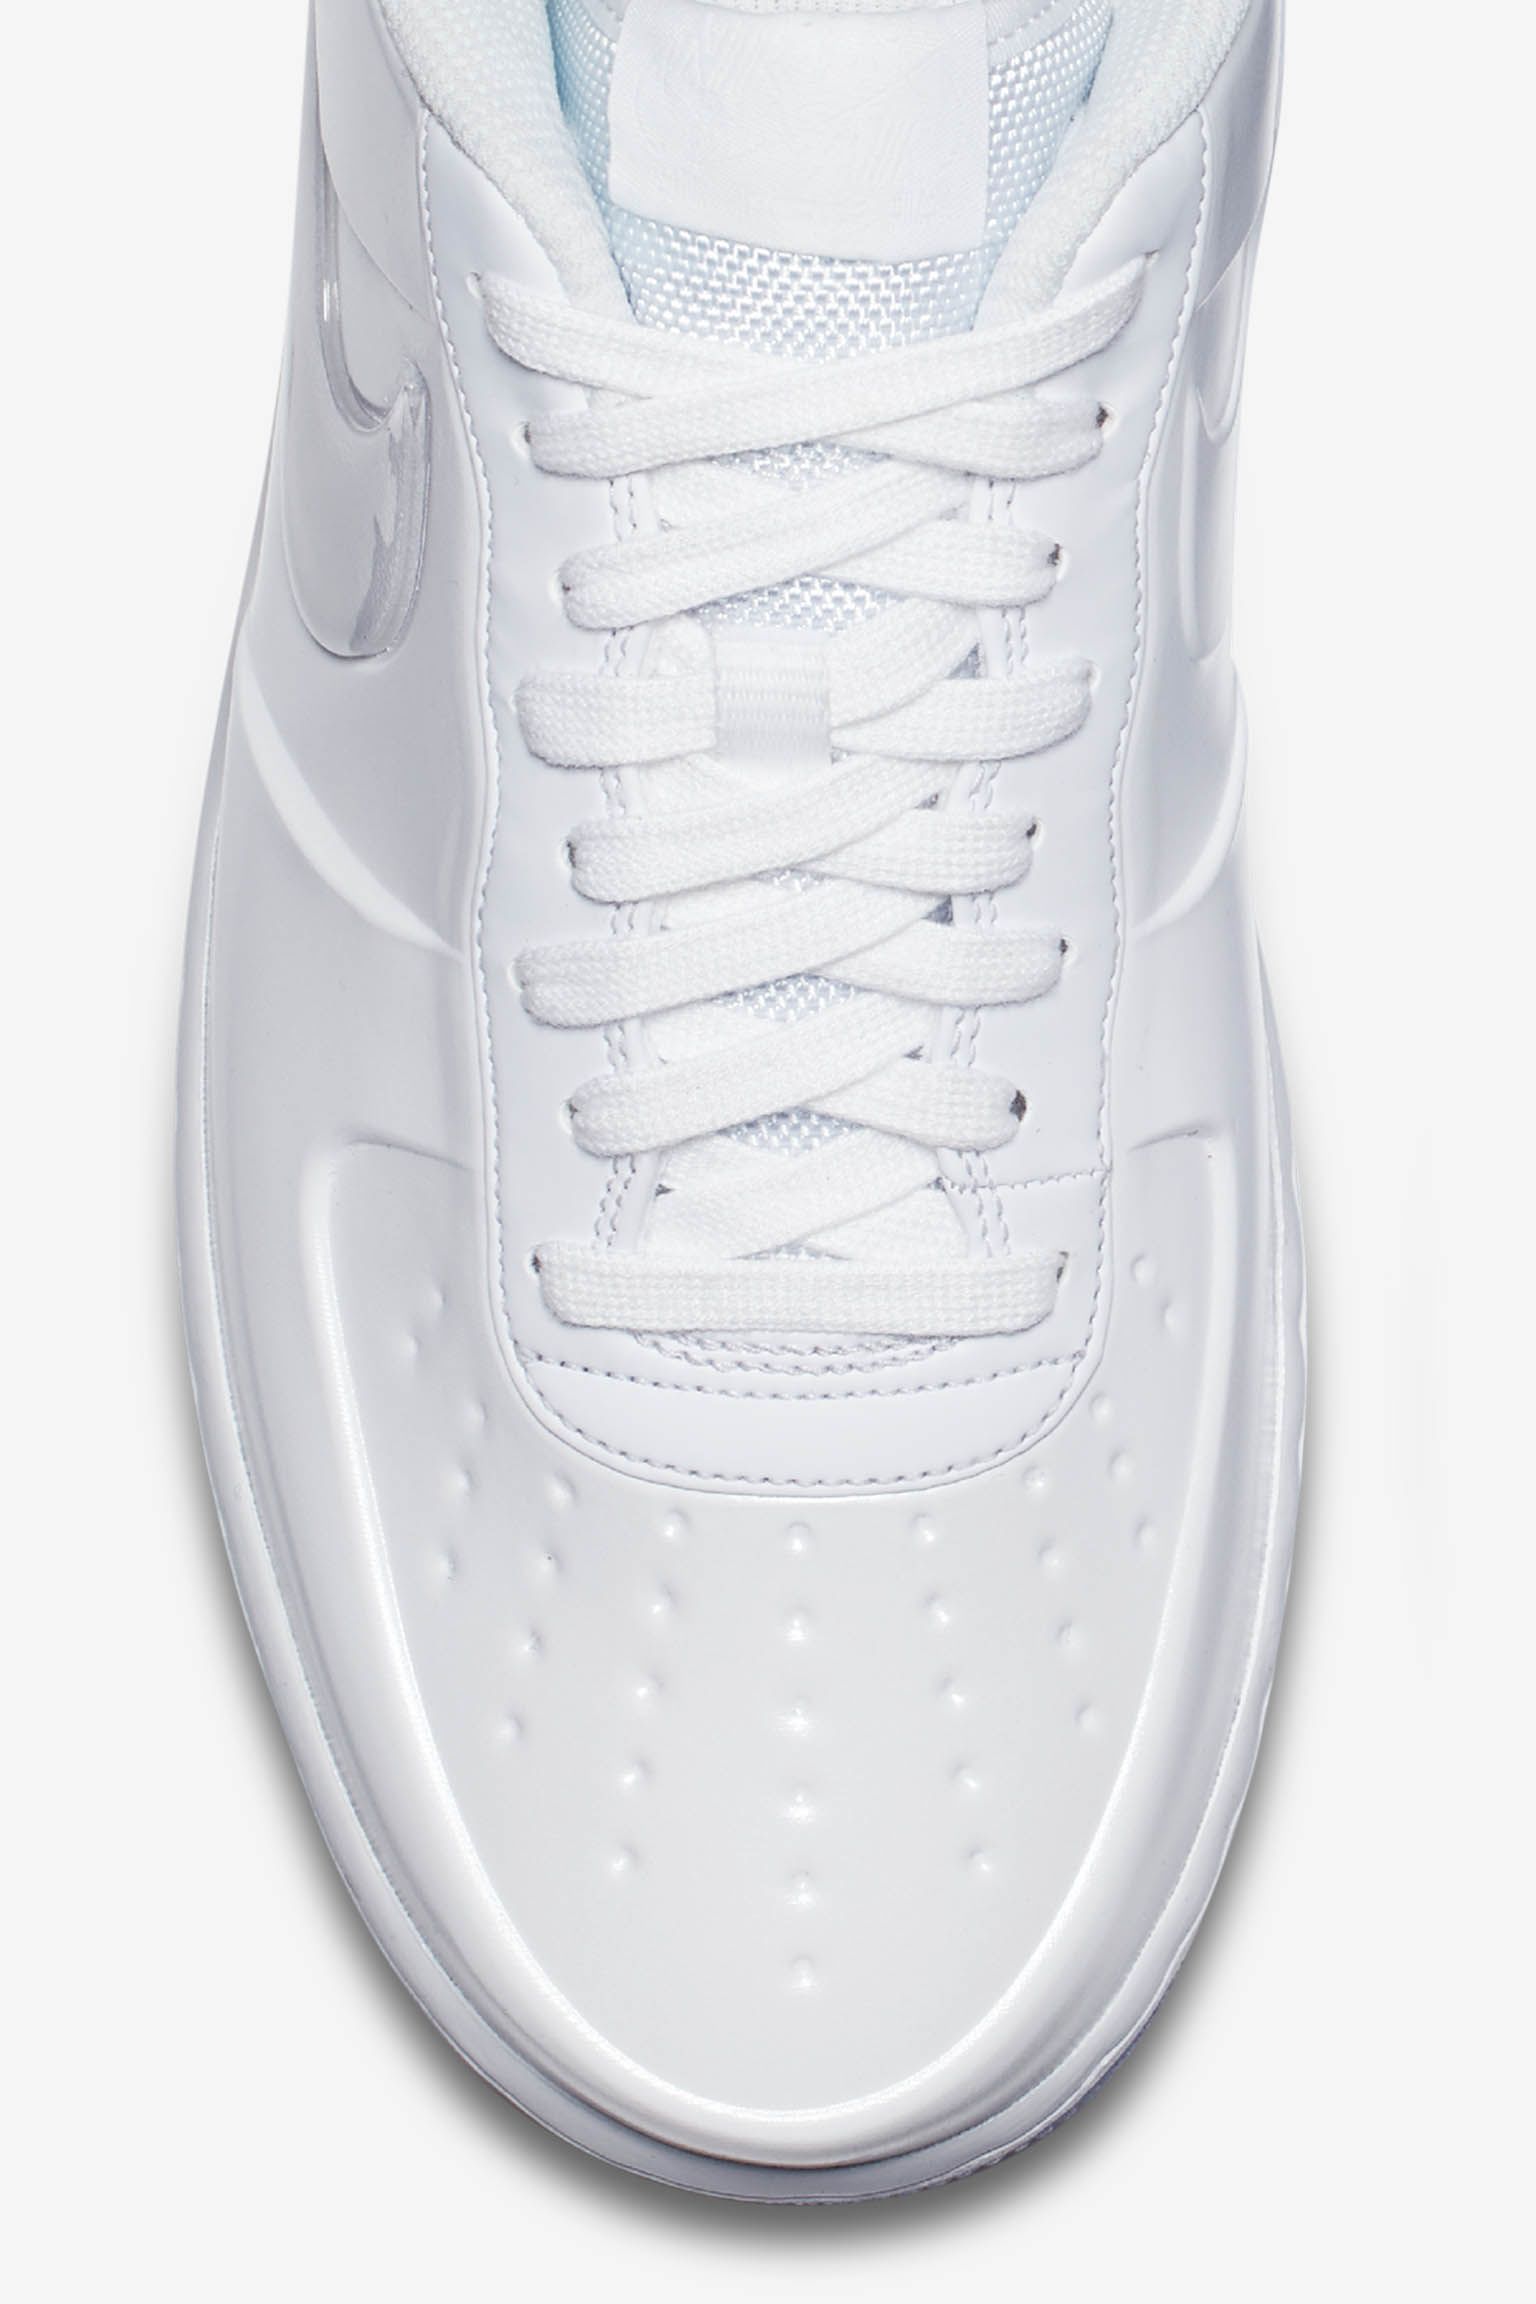 vice versa problem Growl Nike Air Force 1 Foamposite Pro Cup 'Triple White' Release Date. Nike SNKRS